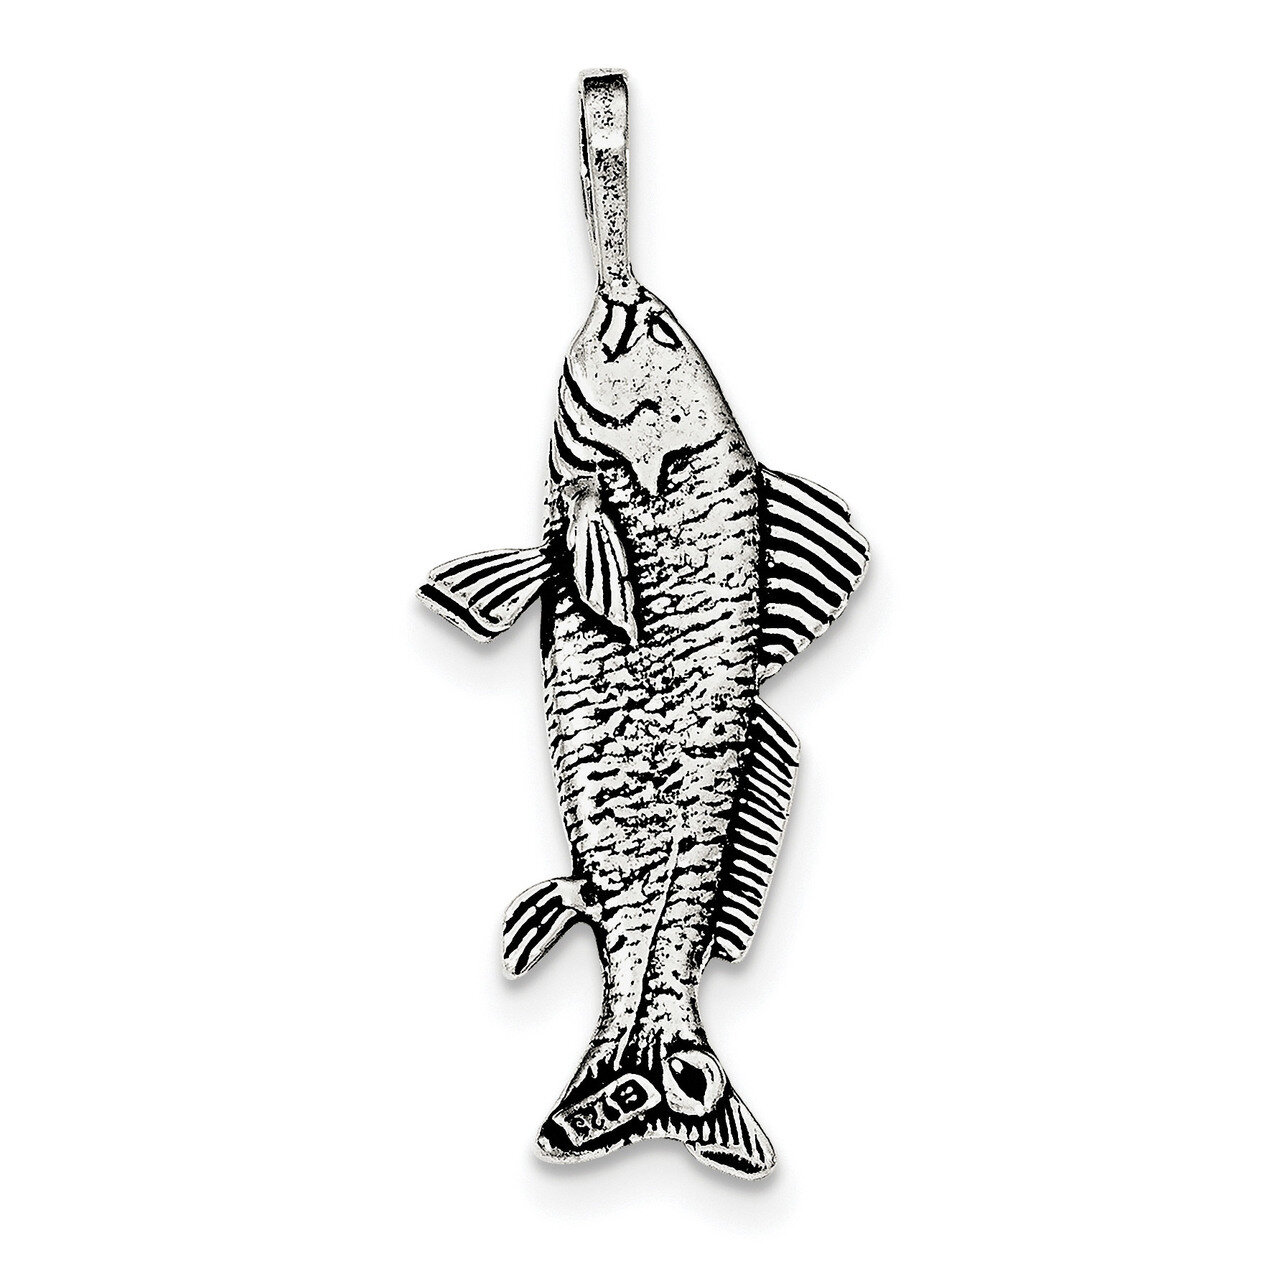 Fish Pendant Sterling Silver Antiqued & Textured QC8763